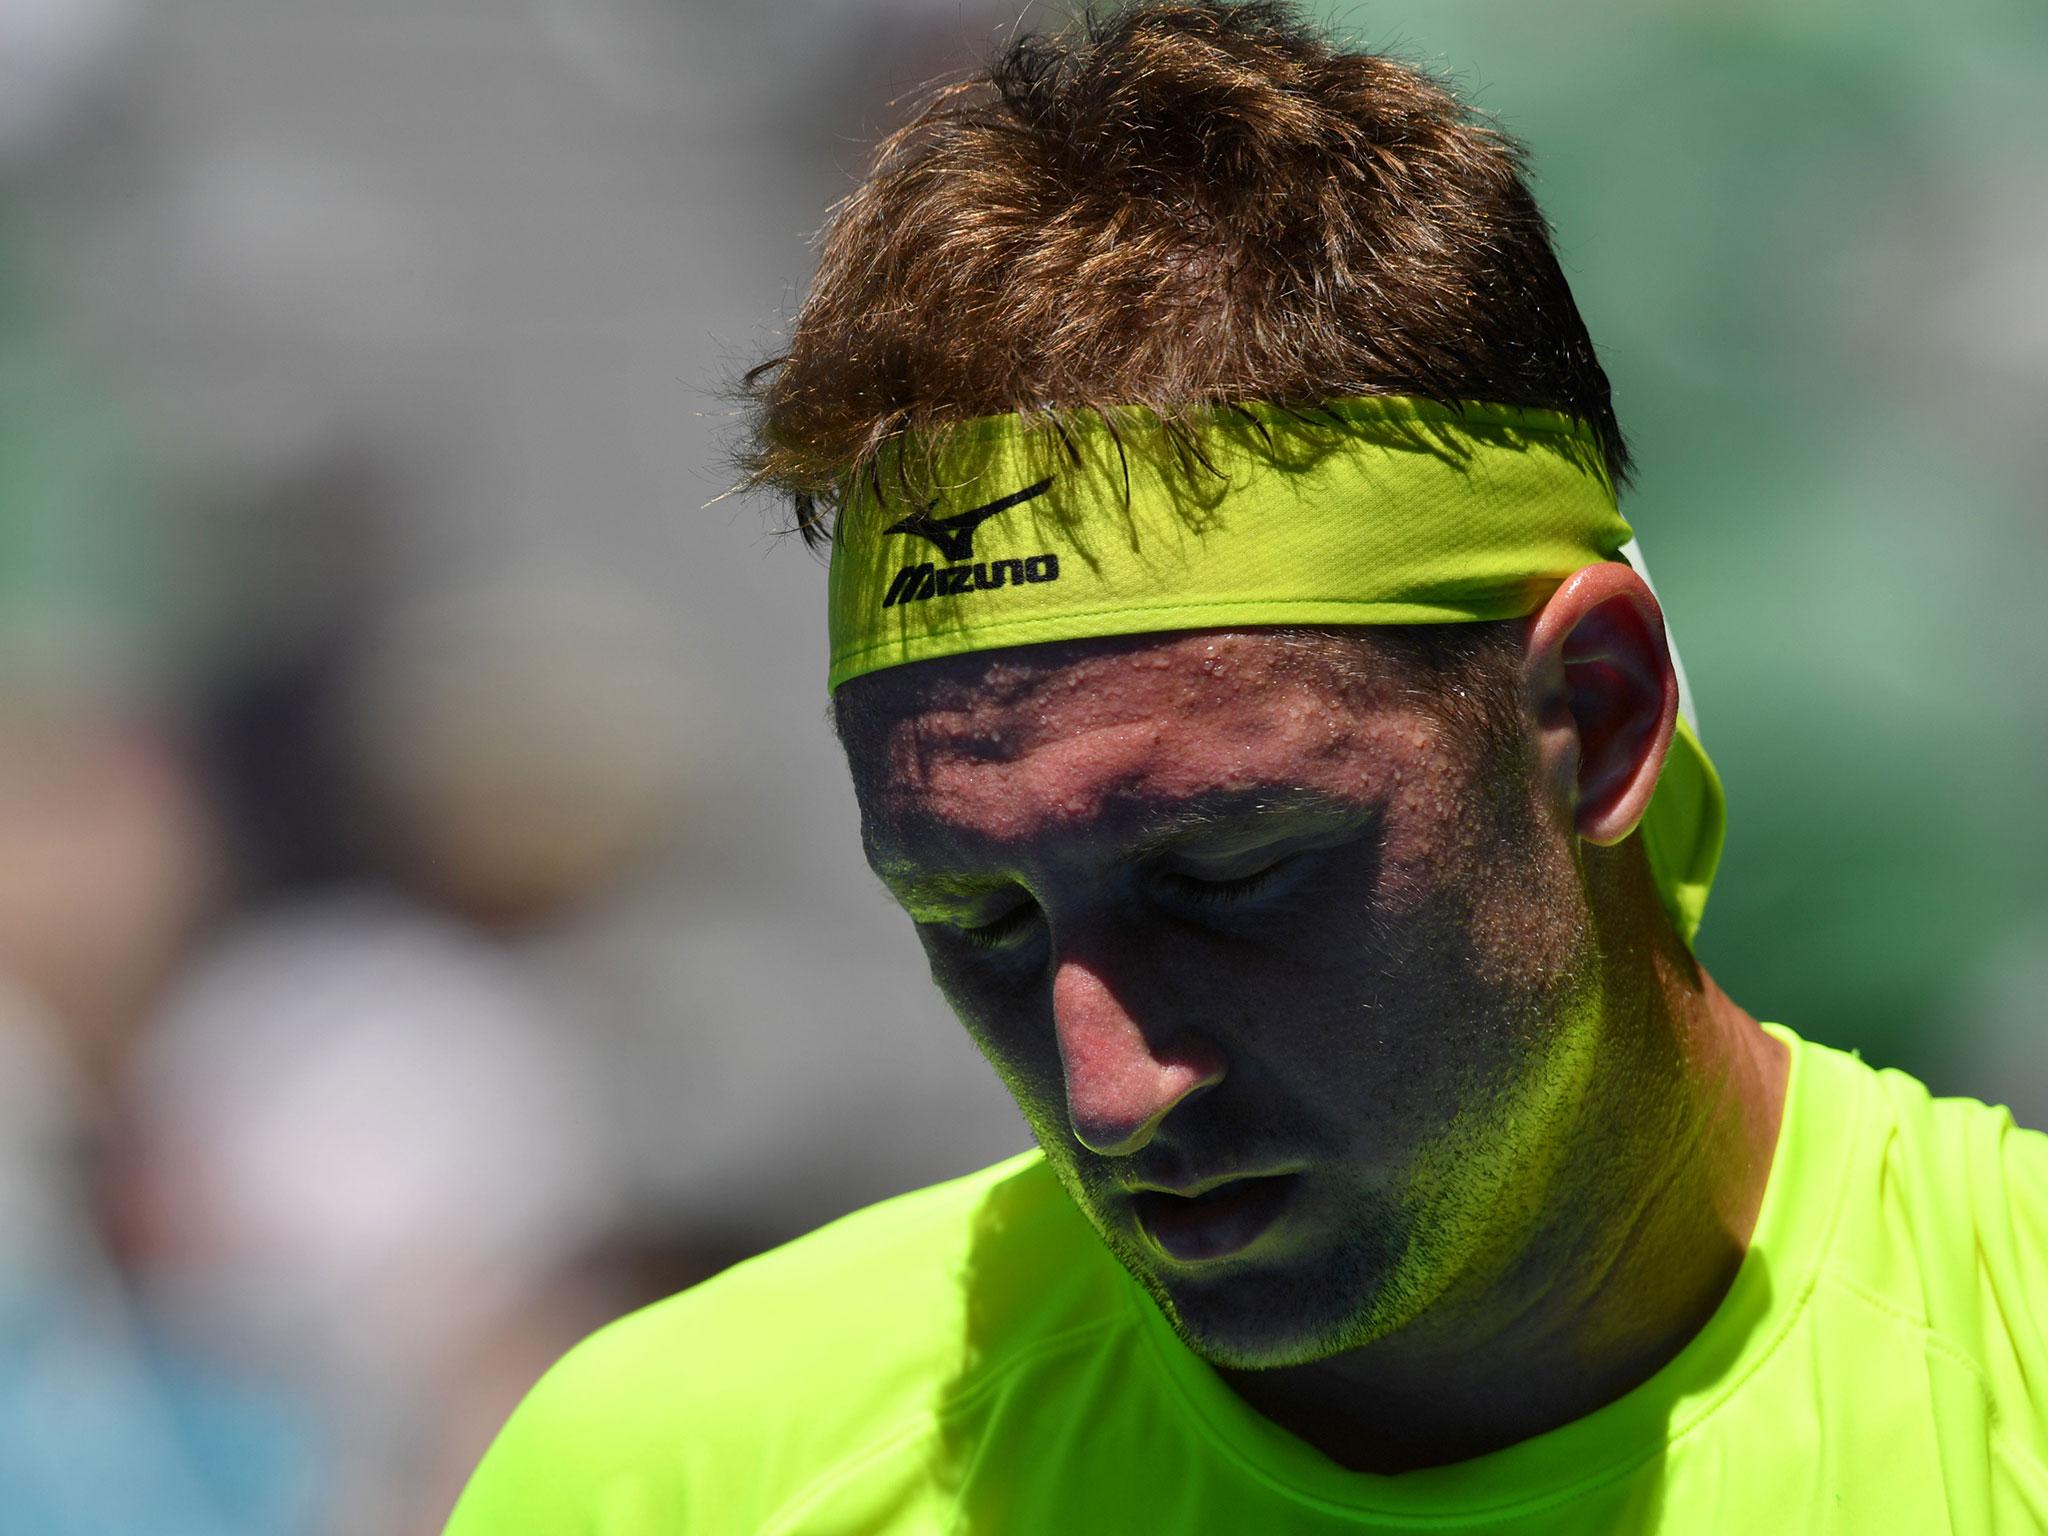 Tennys Sandgren released a statement in his press conference after losing to Hyeon Chung in the semi-finals